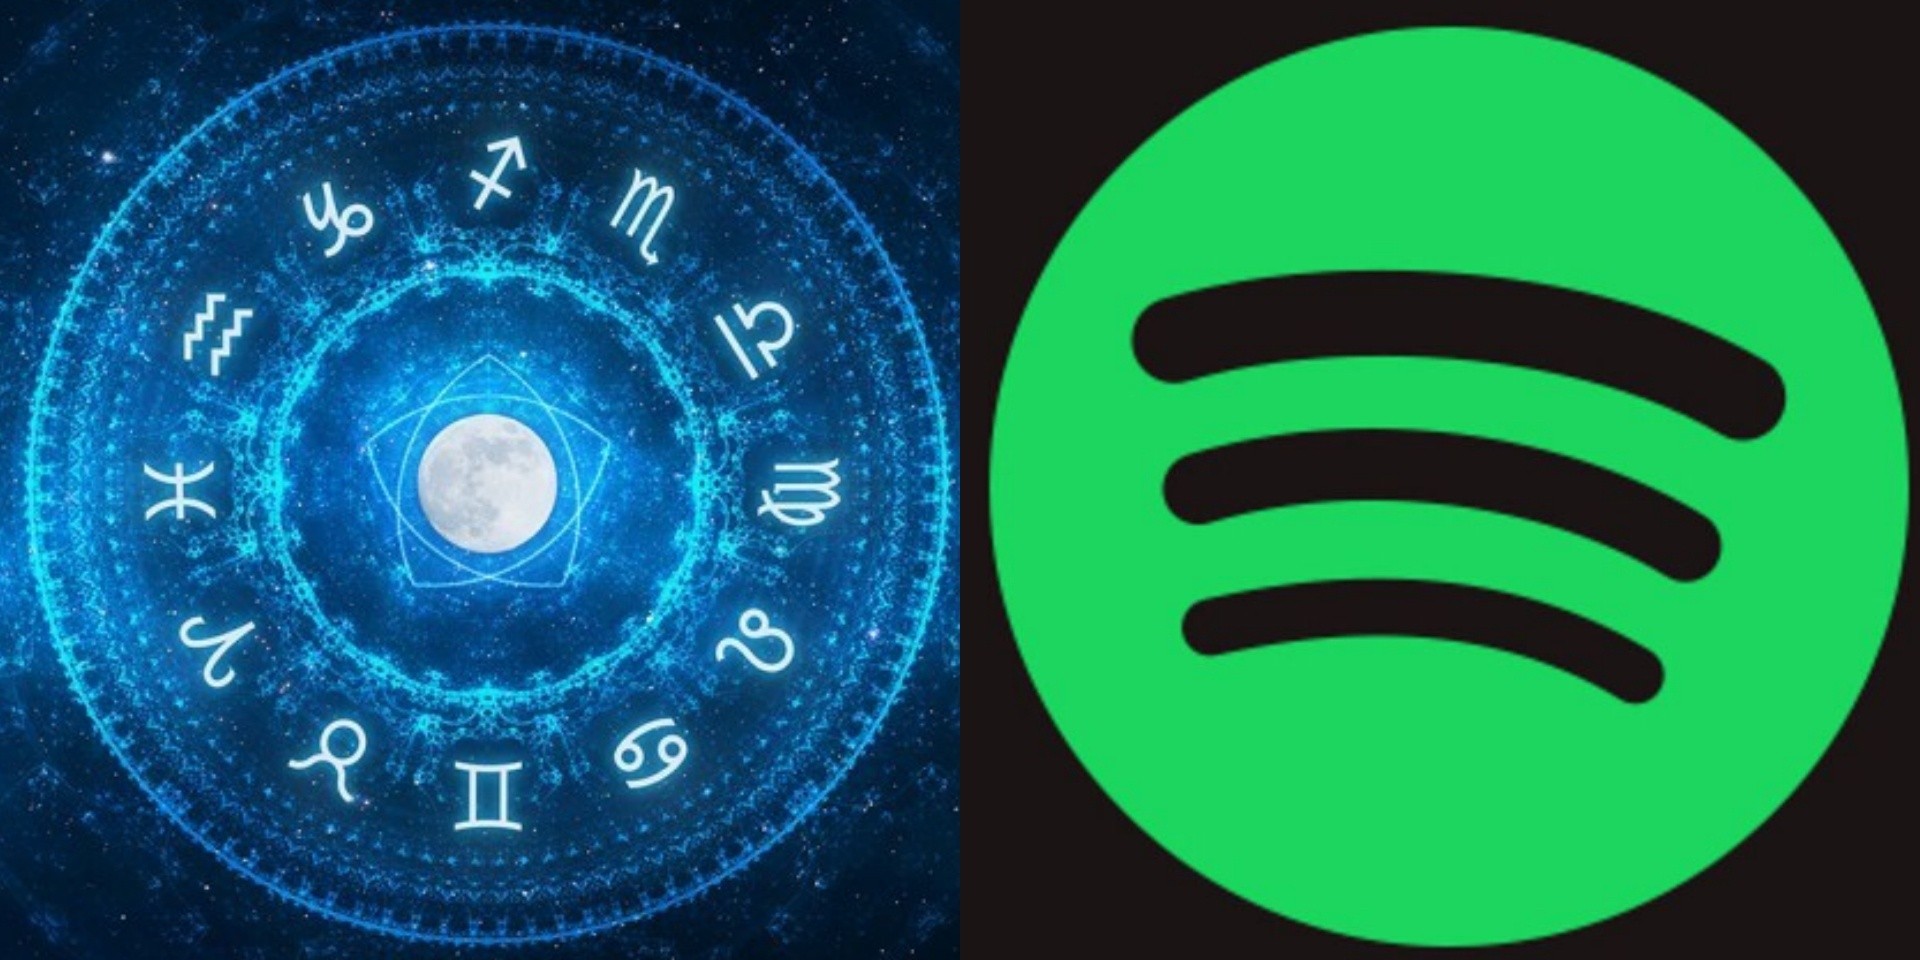 A guide to Spotify's Cosmic Playlists 